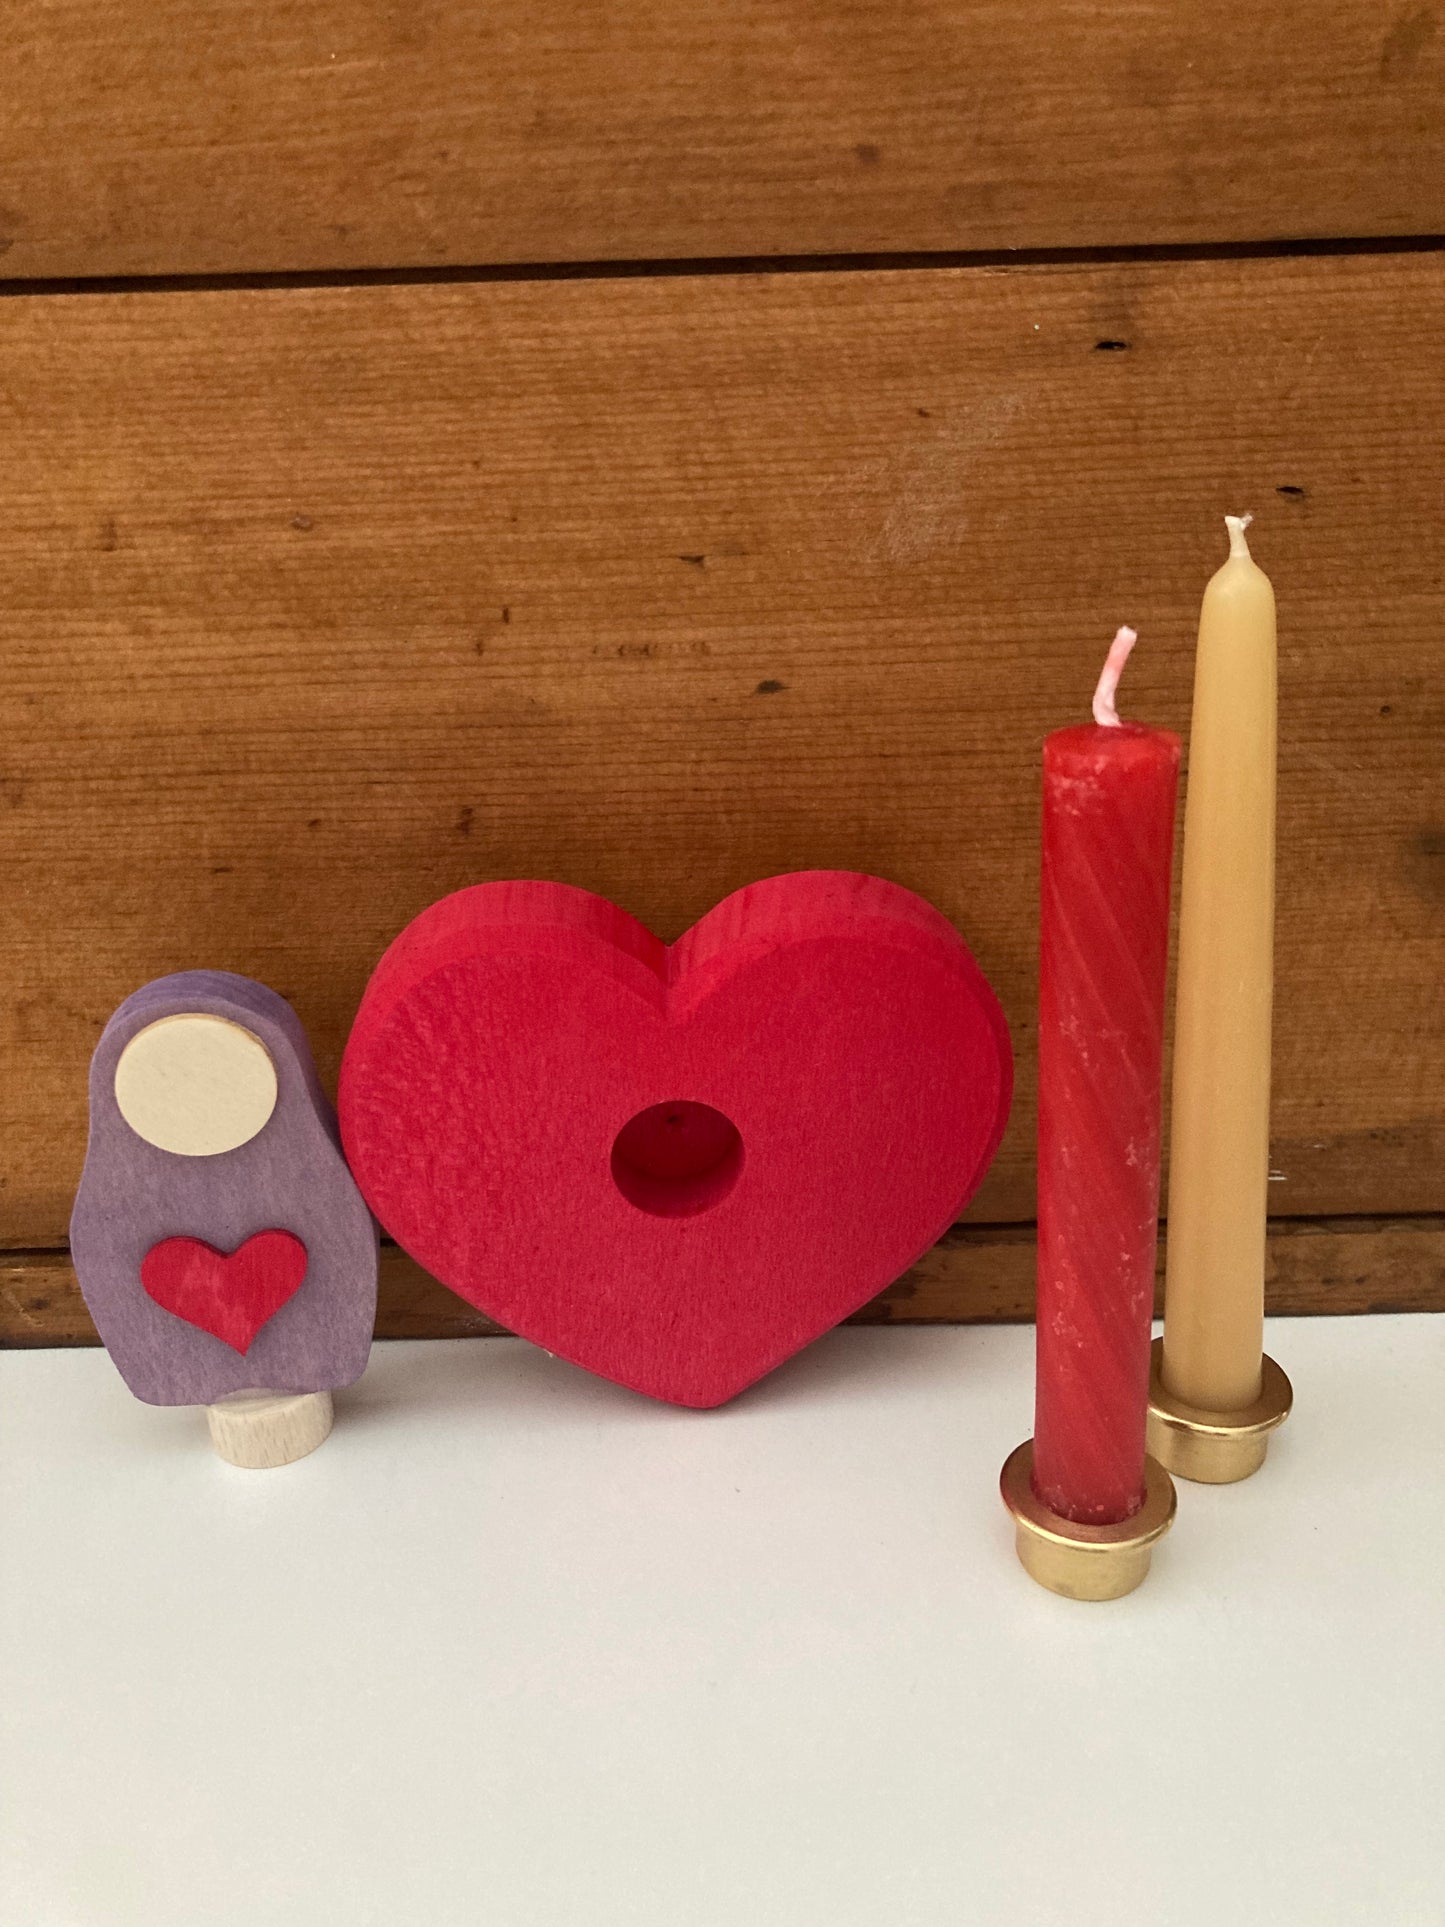 Beeswax Candles - Small RED CANDLES,  4 candles and Sticky Wax (10cm/4 inches)